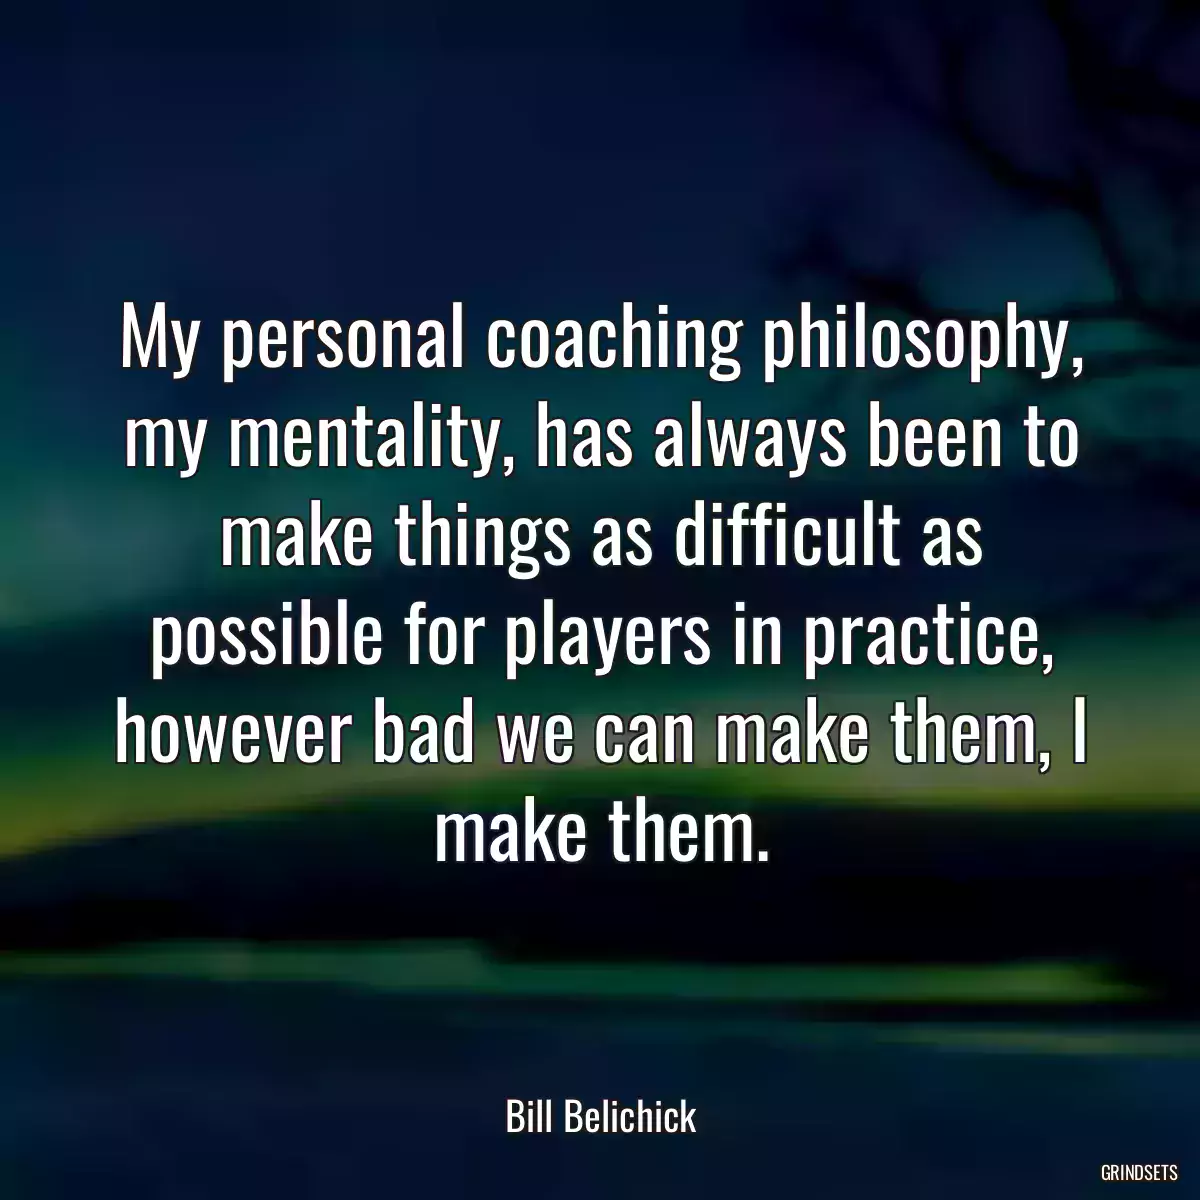 My personal coaching philosophy, my mentality, has always been to make things as difficult as possible for players in practice, however bad we can make them, I make them.